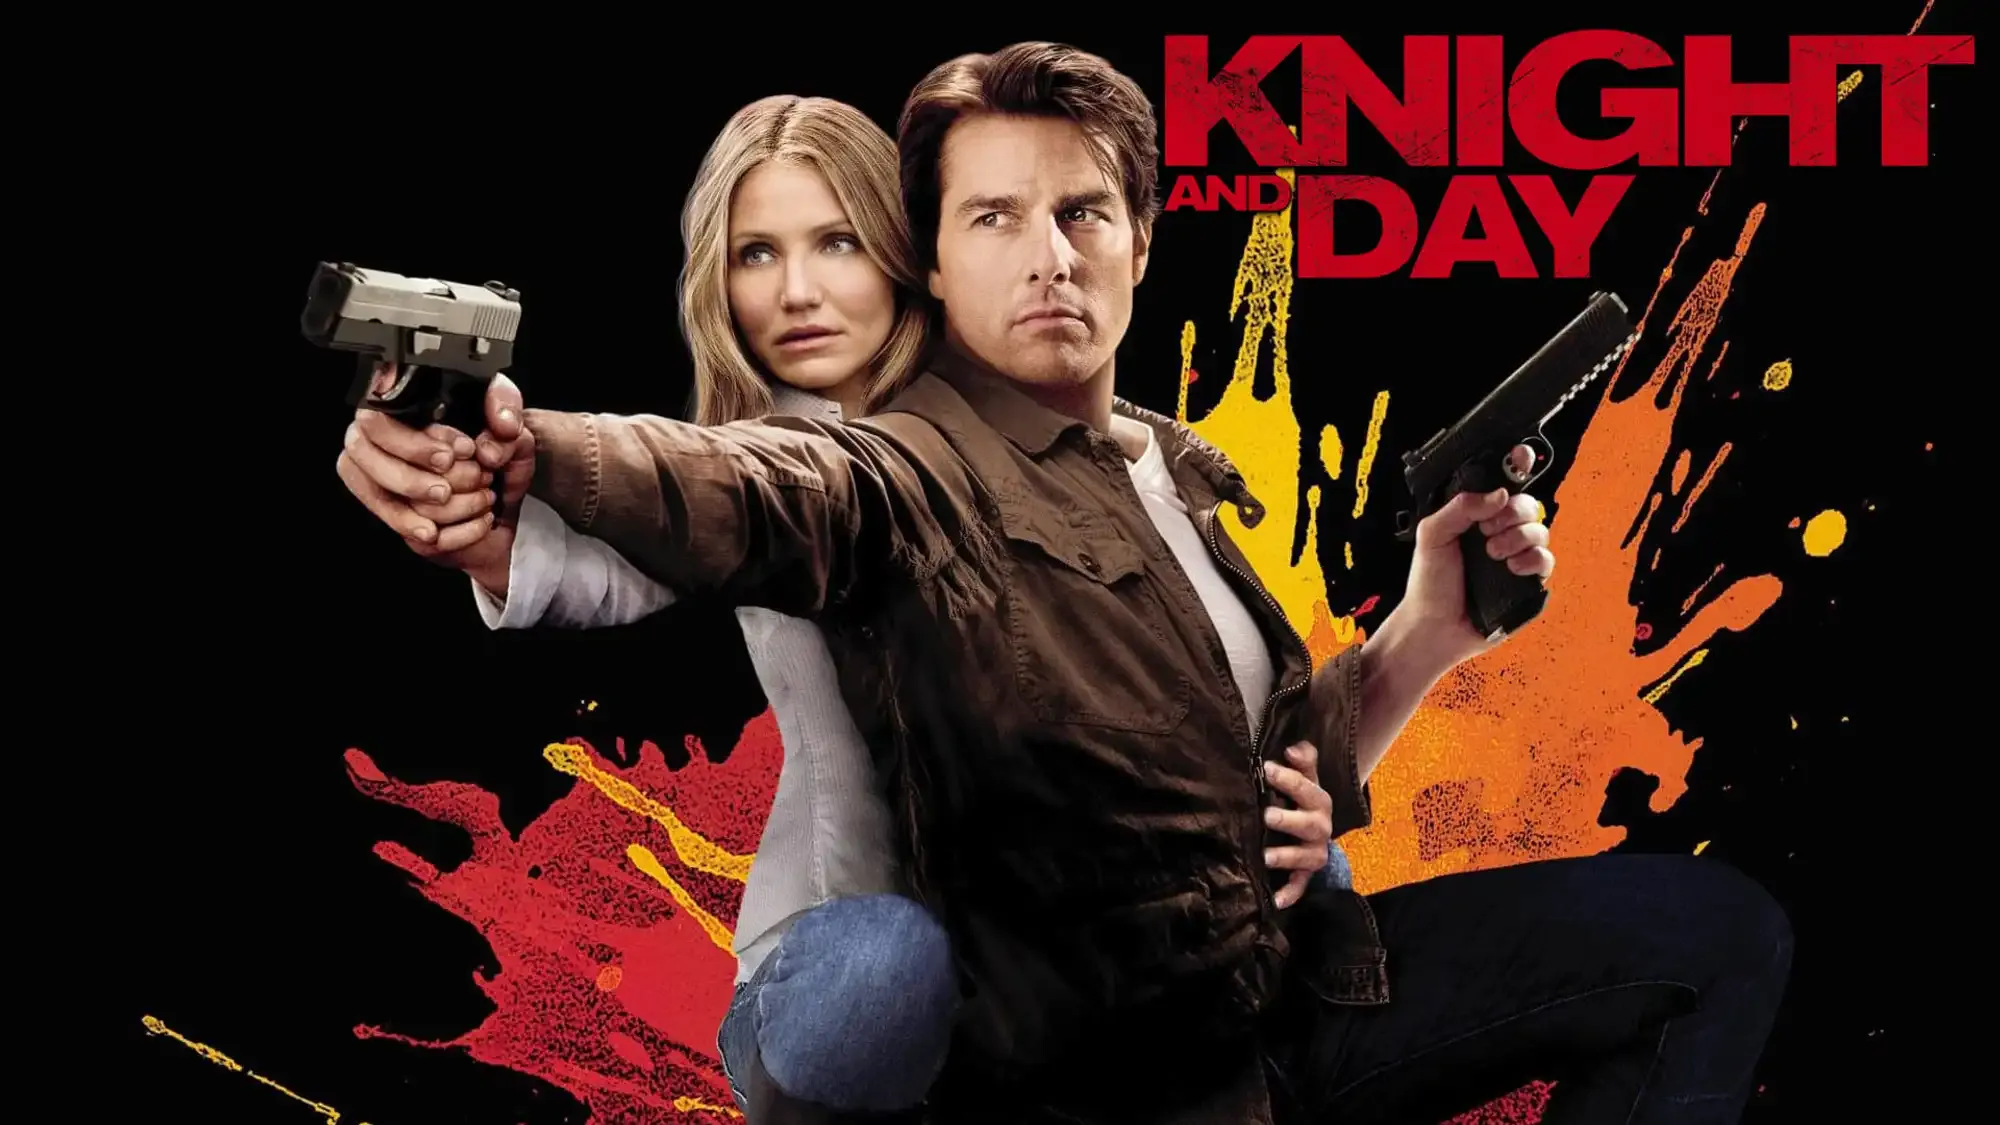 Knight and Day movie review